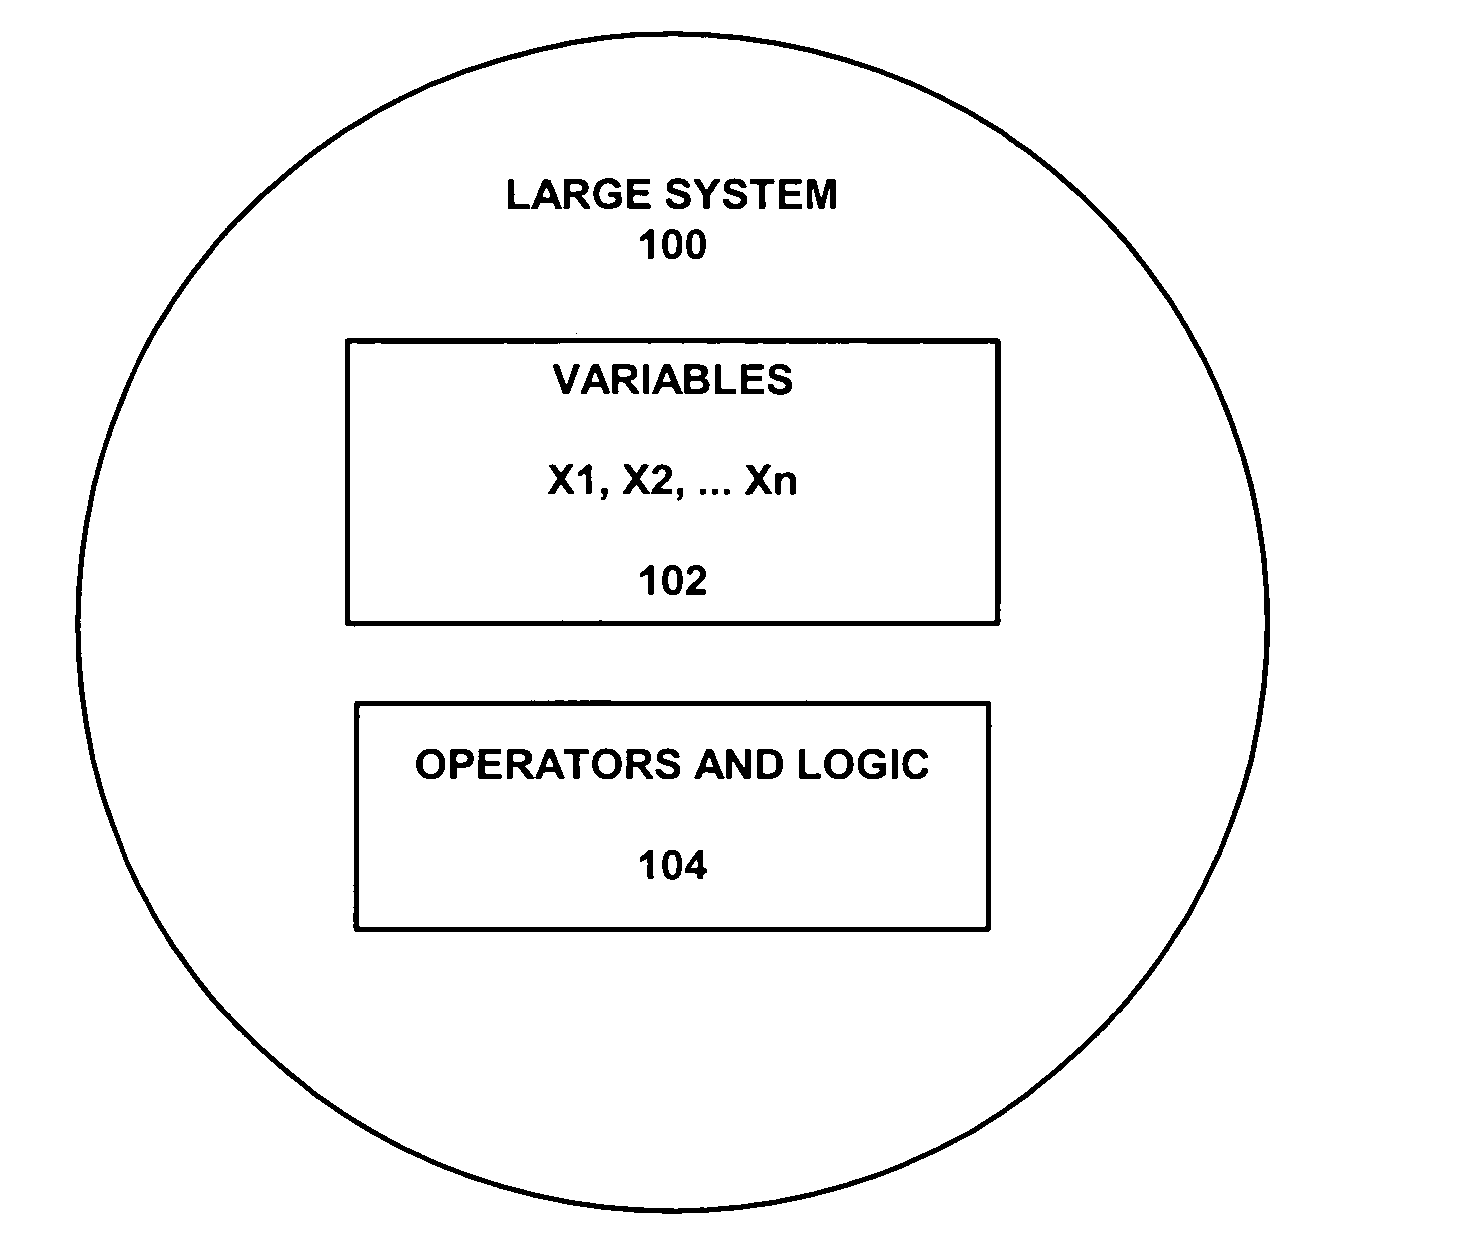 Macroscopic model for large software system